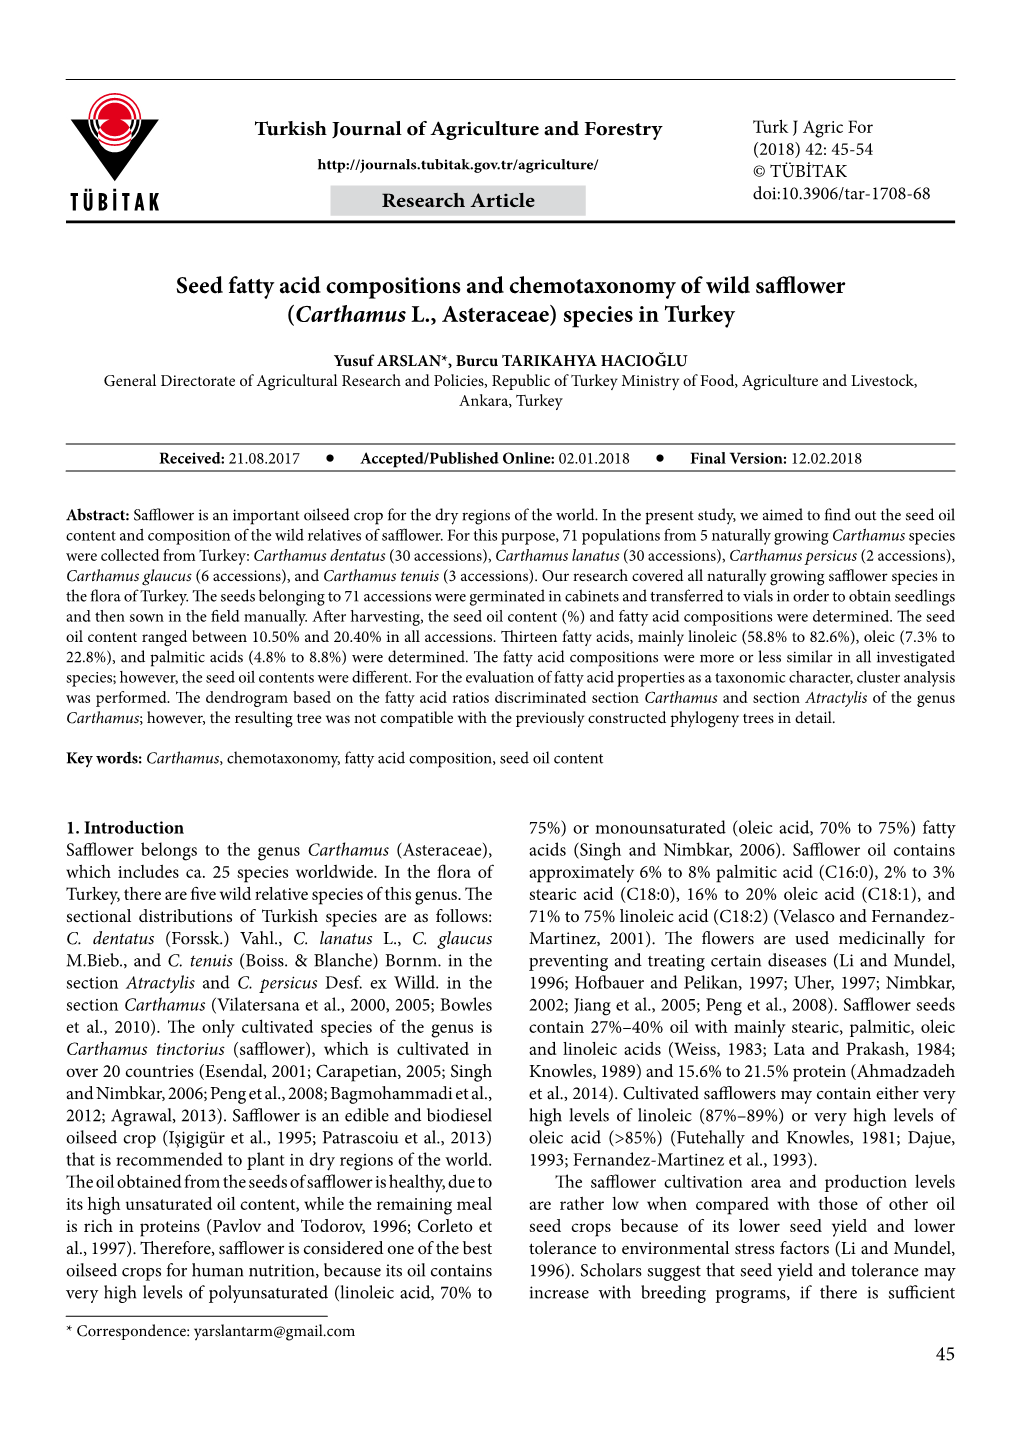 Seed Fatty Acid Compositions and Chemotaxonomy of Wild Safflower (Carthamus L., Asteraceae) Species in Turkey